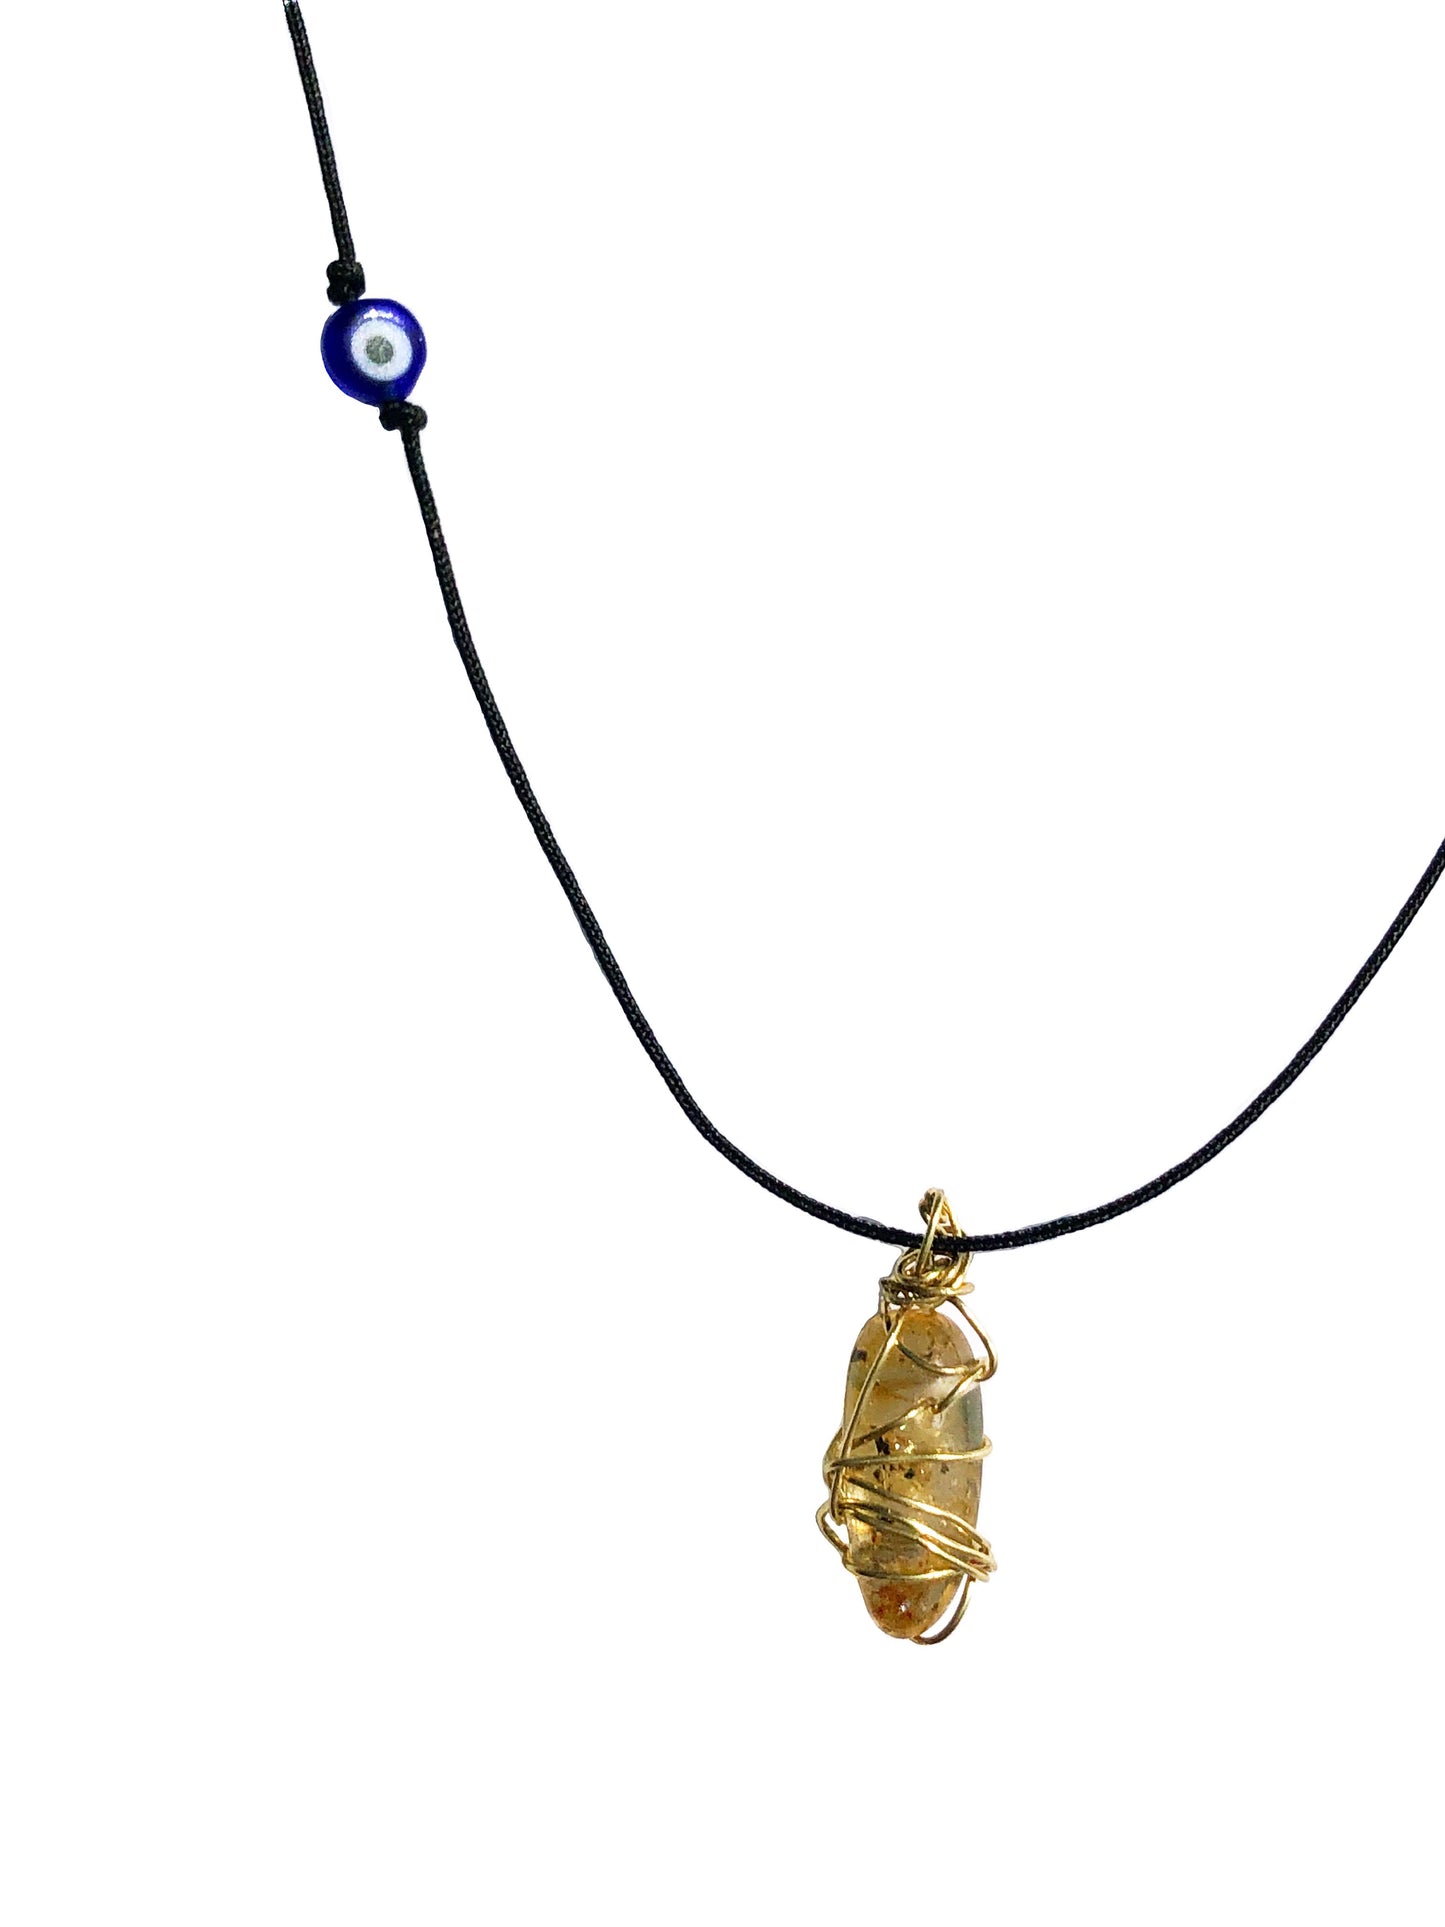 yellow tourmaline golden wire wrapped necklace with evil eye charm. 